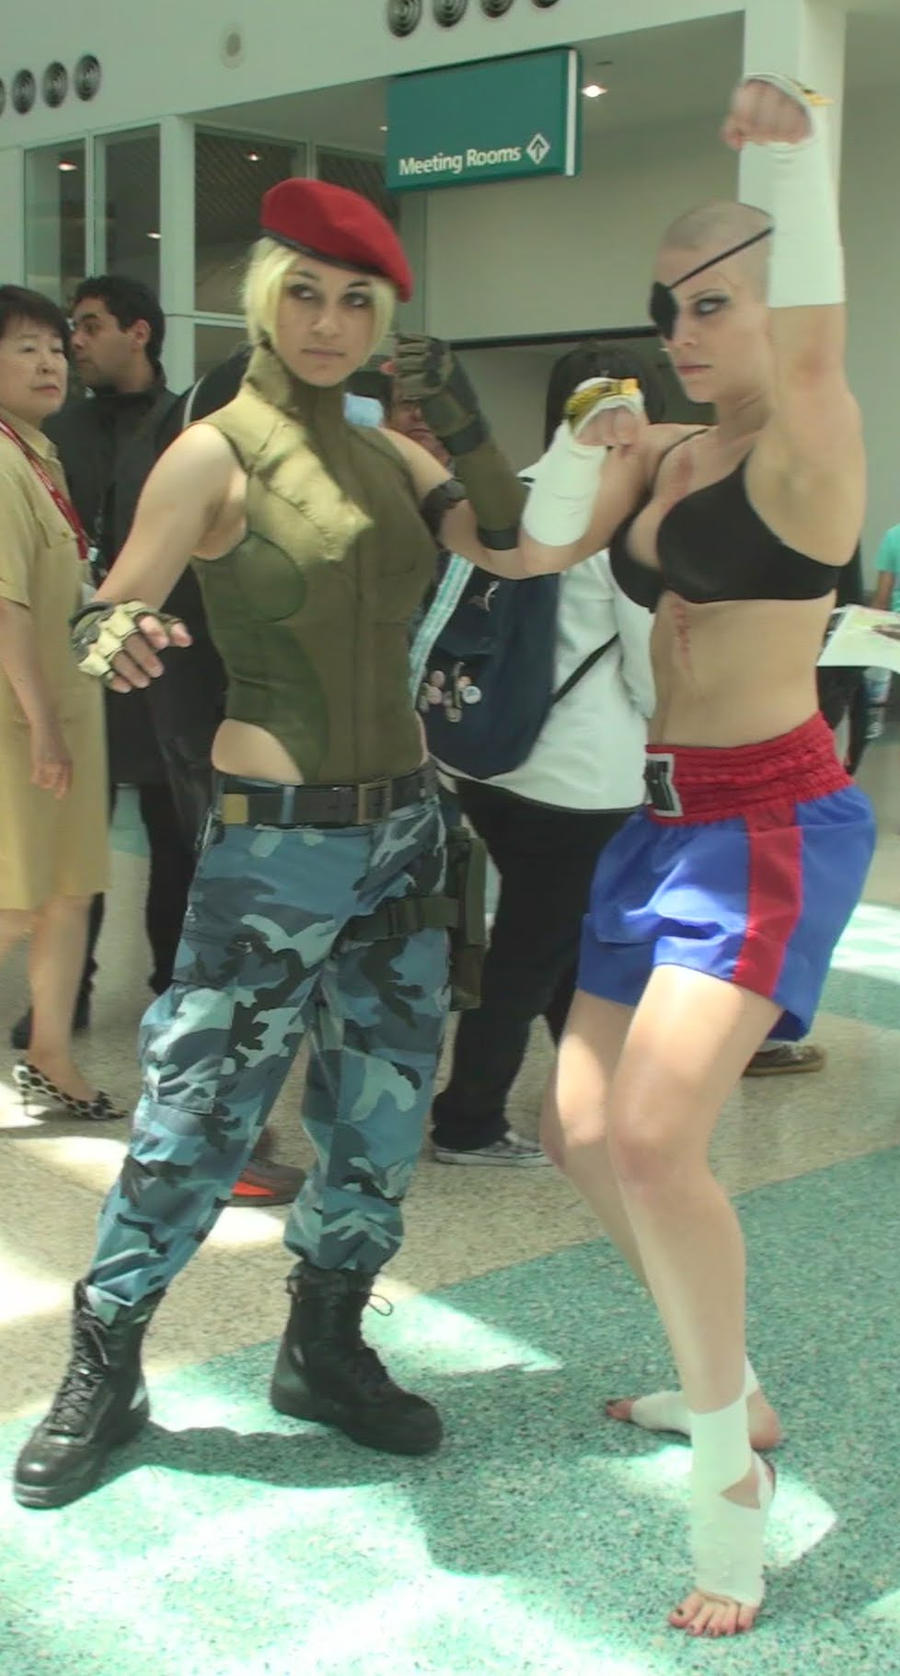 Cammy and female version of Sagat at AX 2013